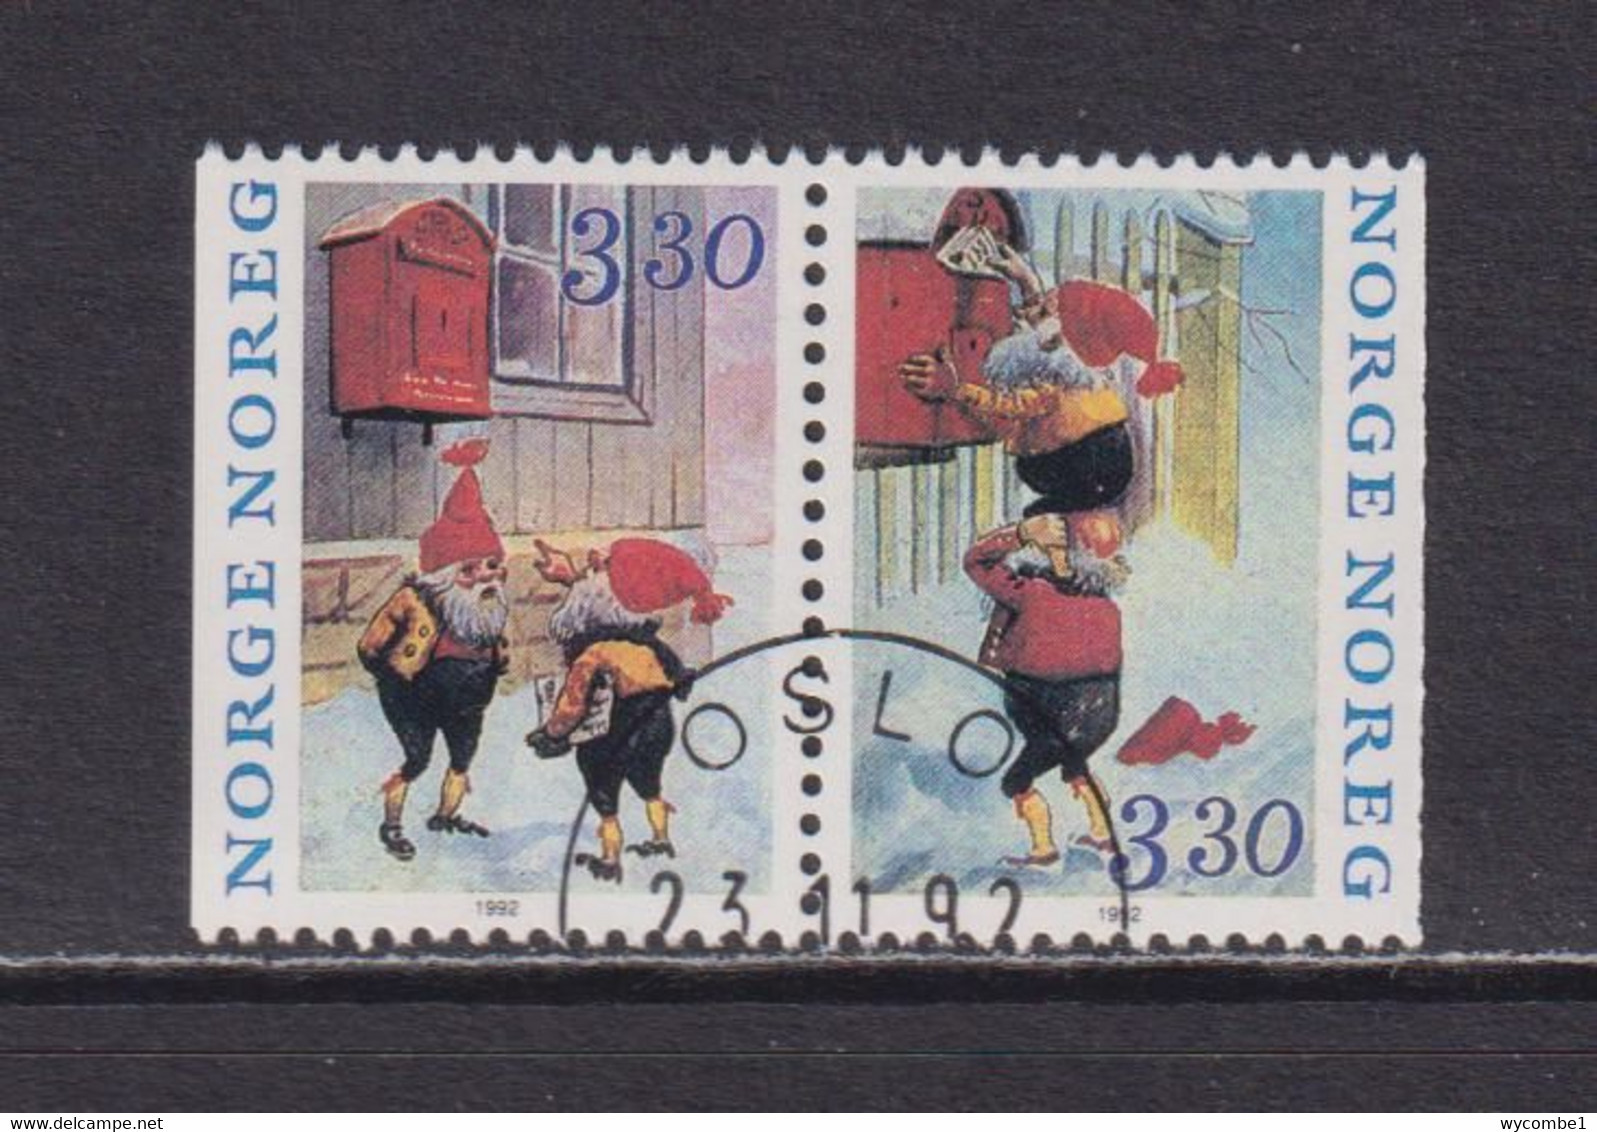 NORWAY - 1992 Christmas Booklet Pair Used As Scan - Oblitérés